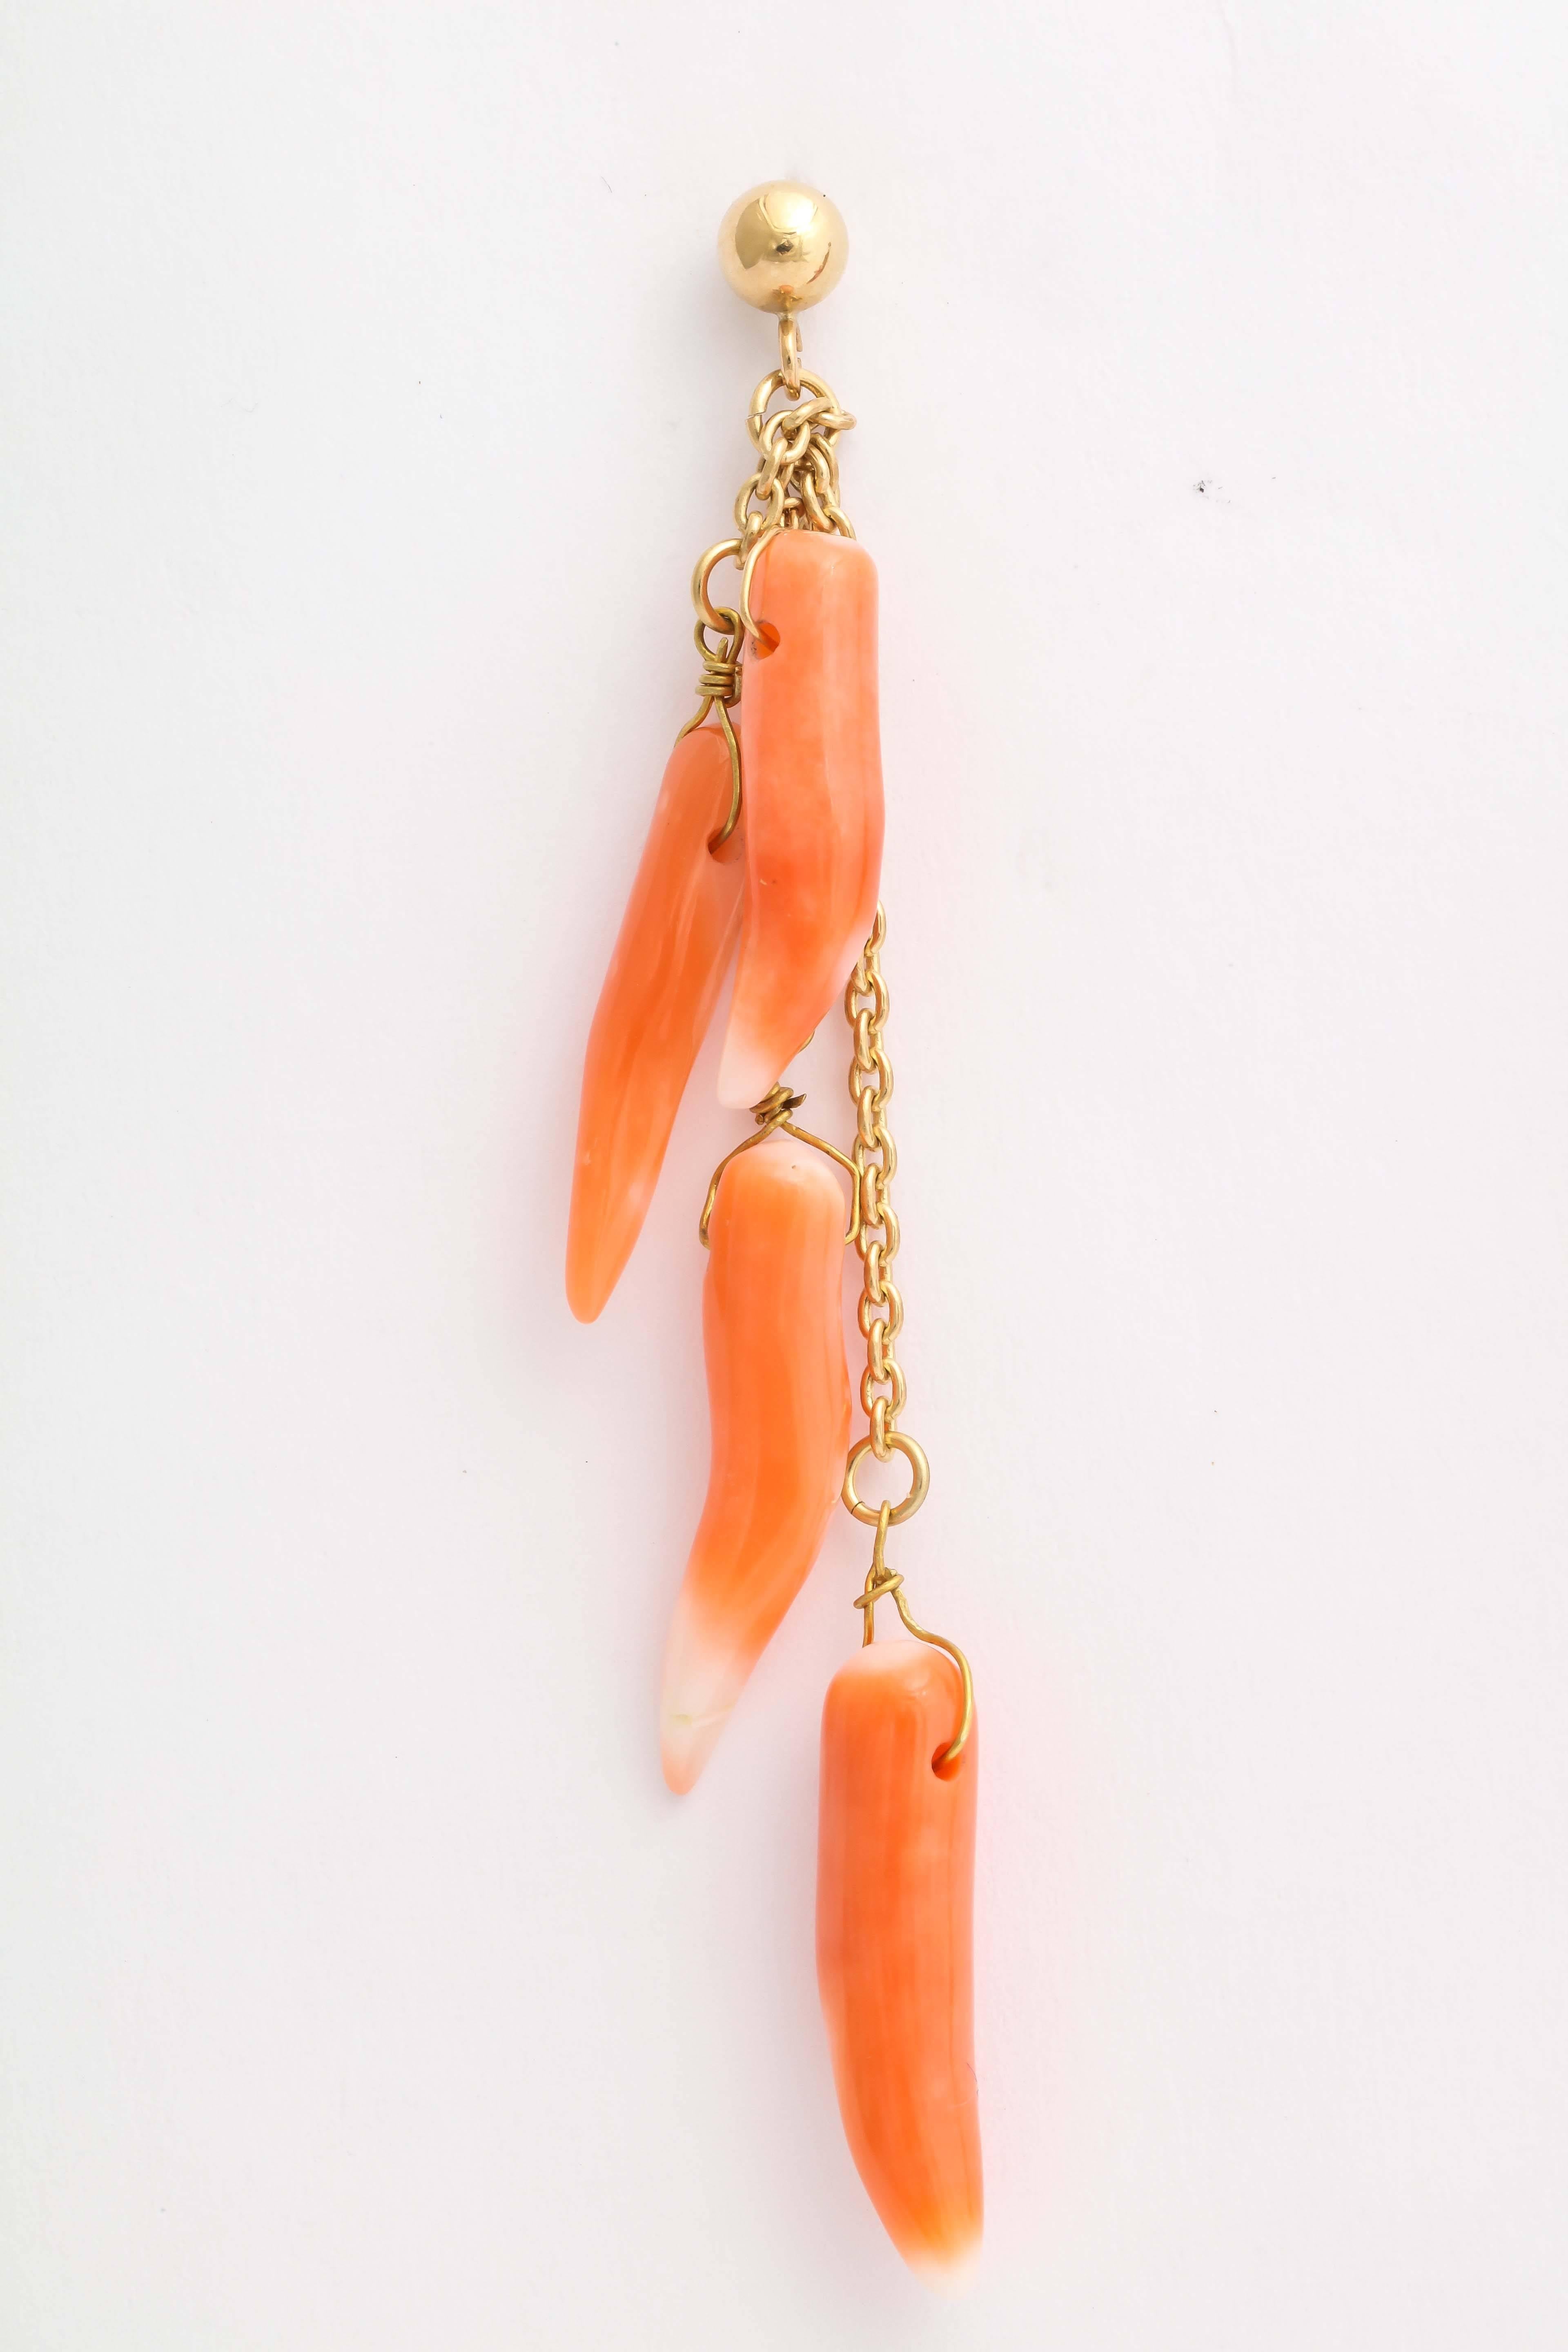 Four horn shaped natural orange and white corals dangle on various length 14 kt gold chains on each earring. The top is a 14 kt gold ball and post. Total length 2 1/4 in.